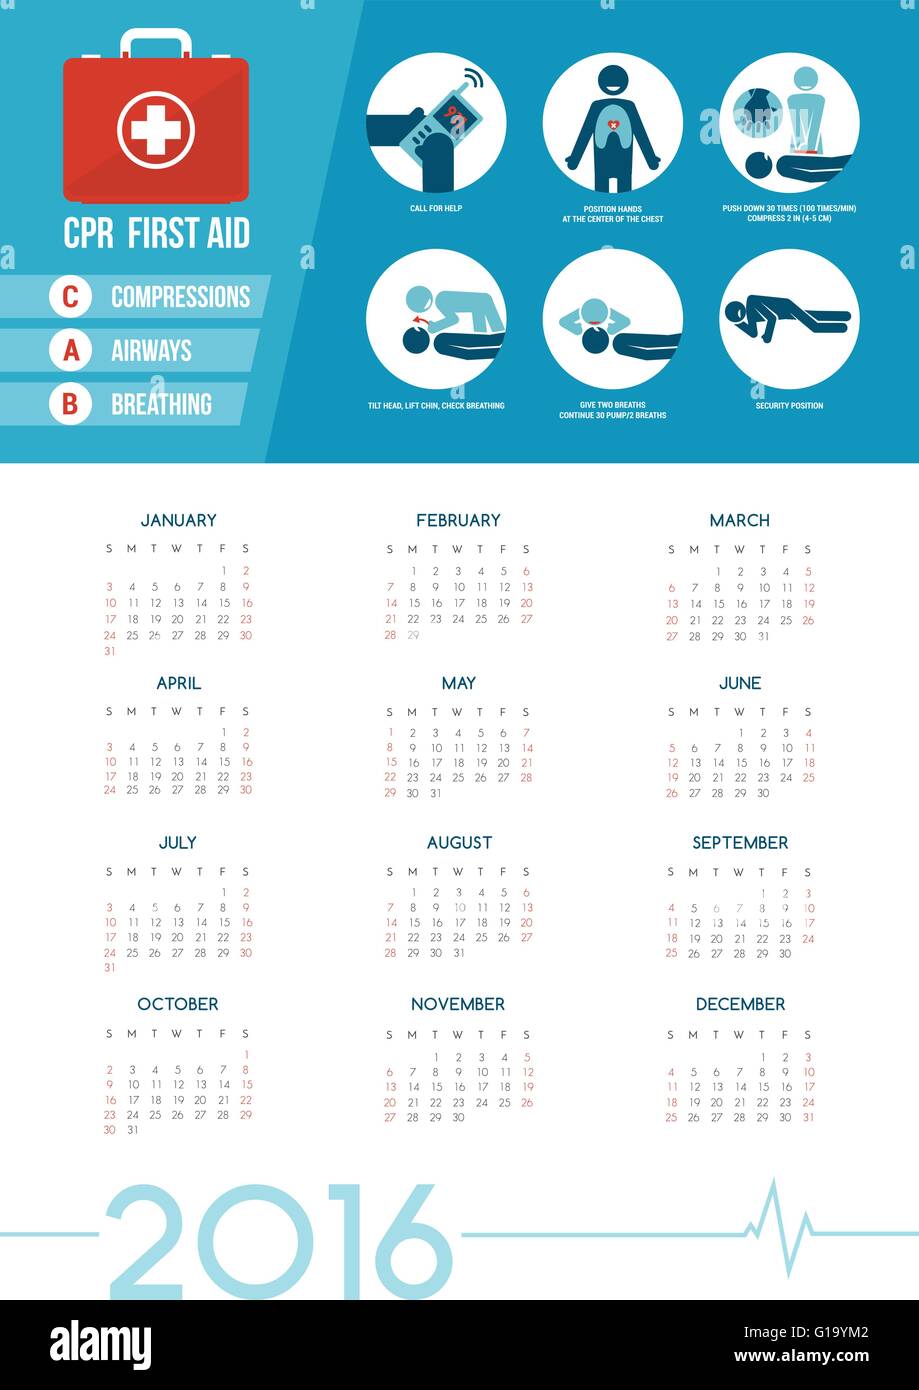 CPR and first aid kit calendar 2016 with medical supplies for emergencies, healthcare concept Stock Vector